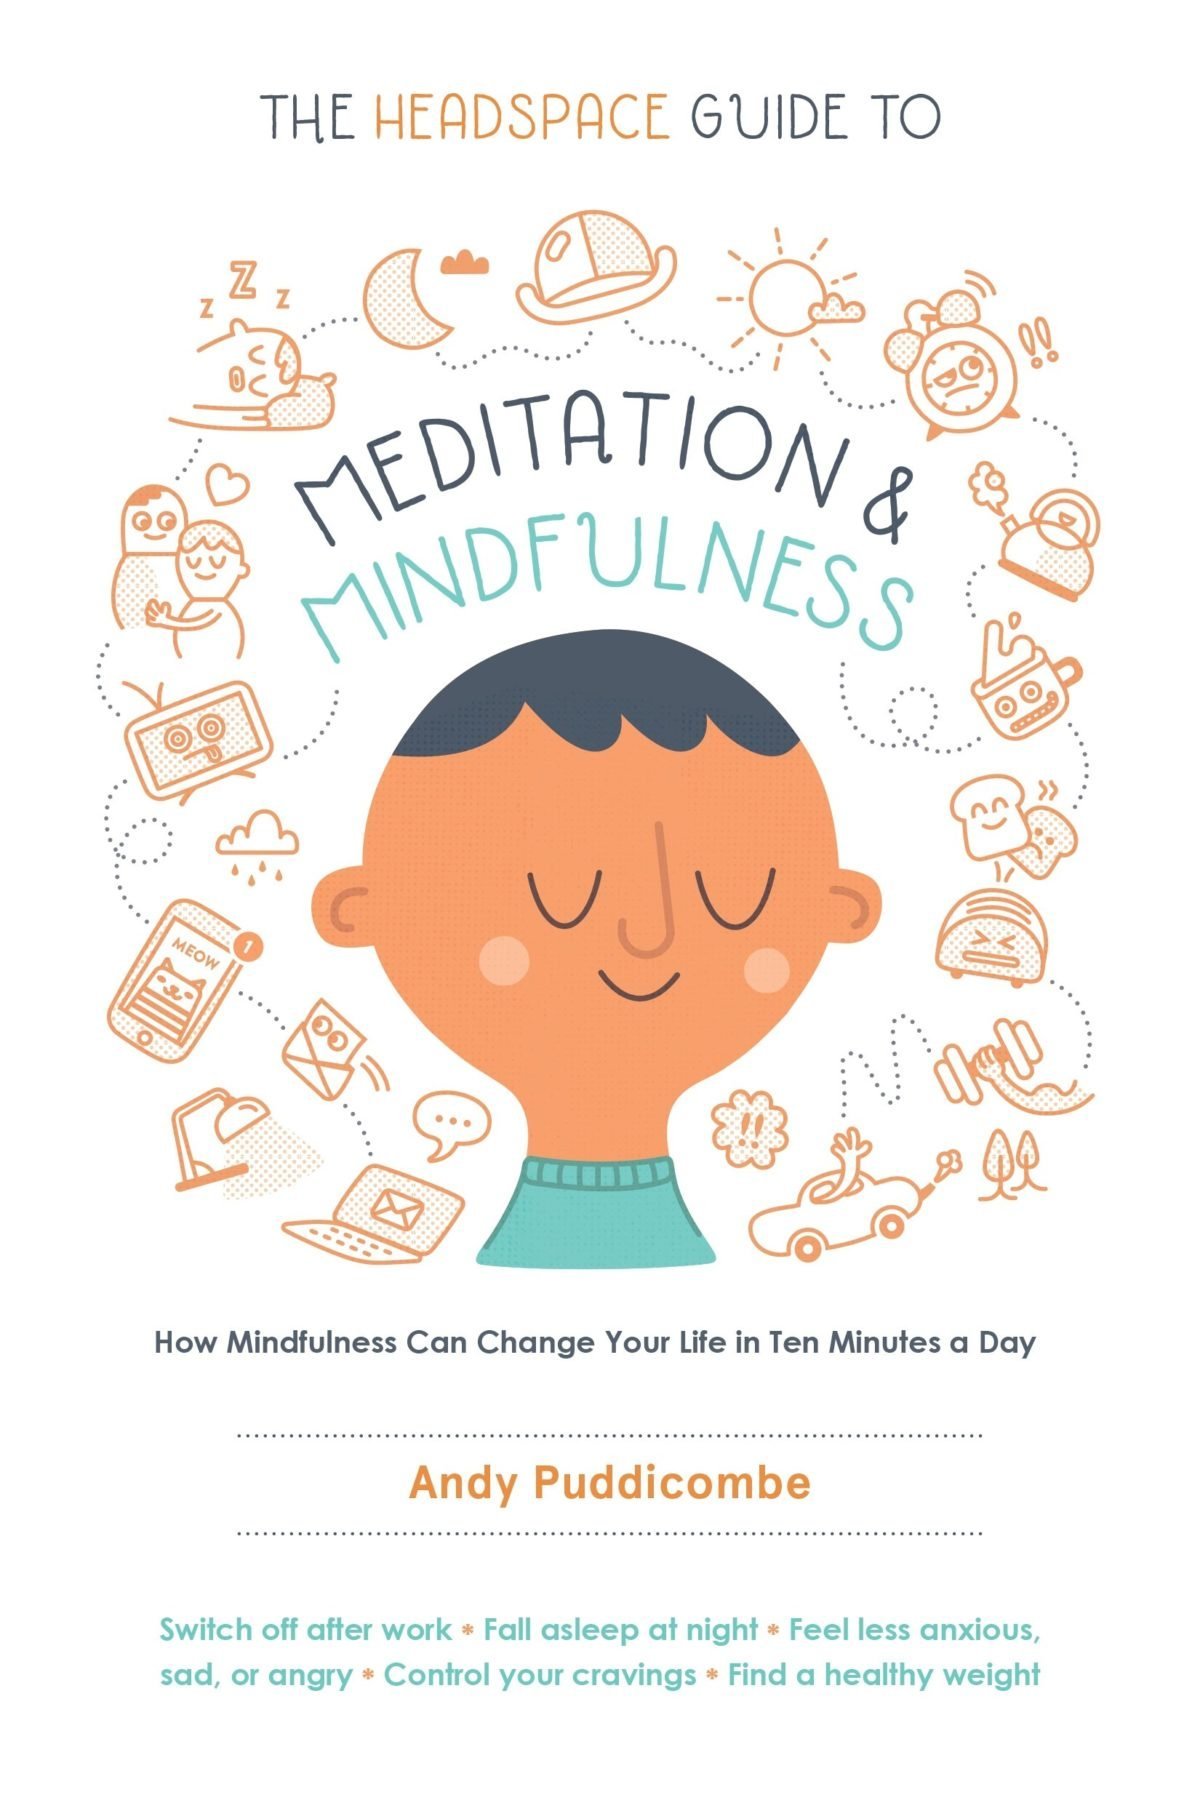 Bill Gates review mediation and mindfulness